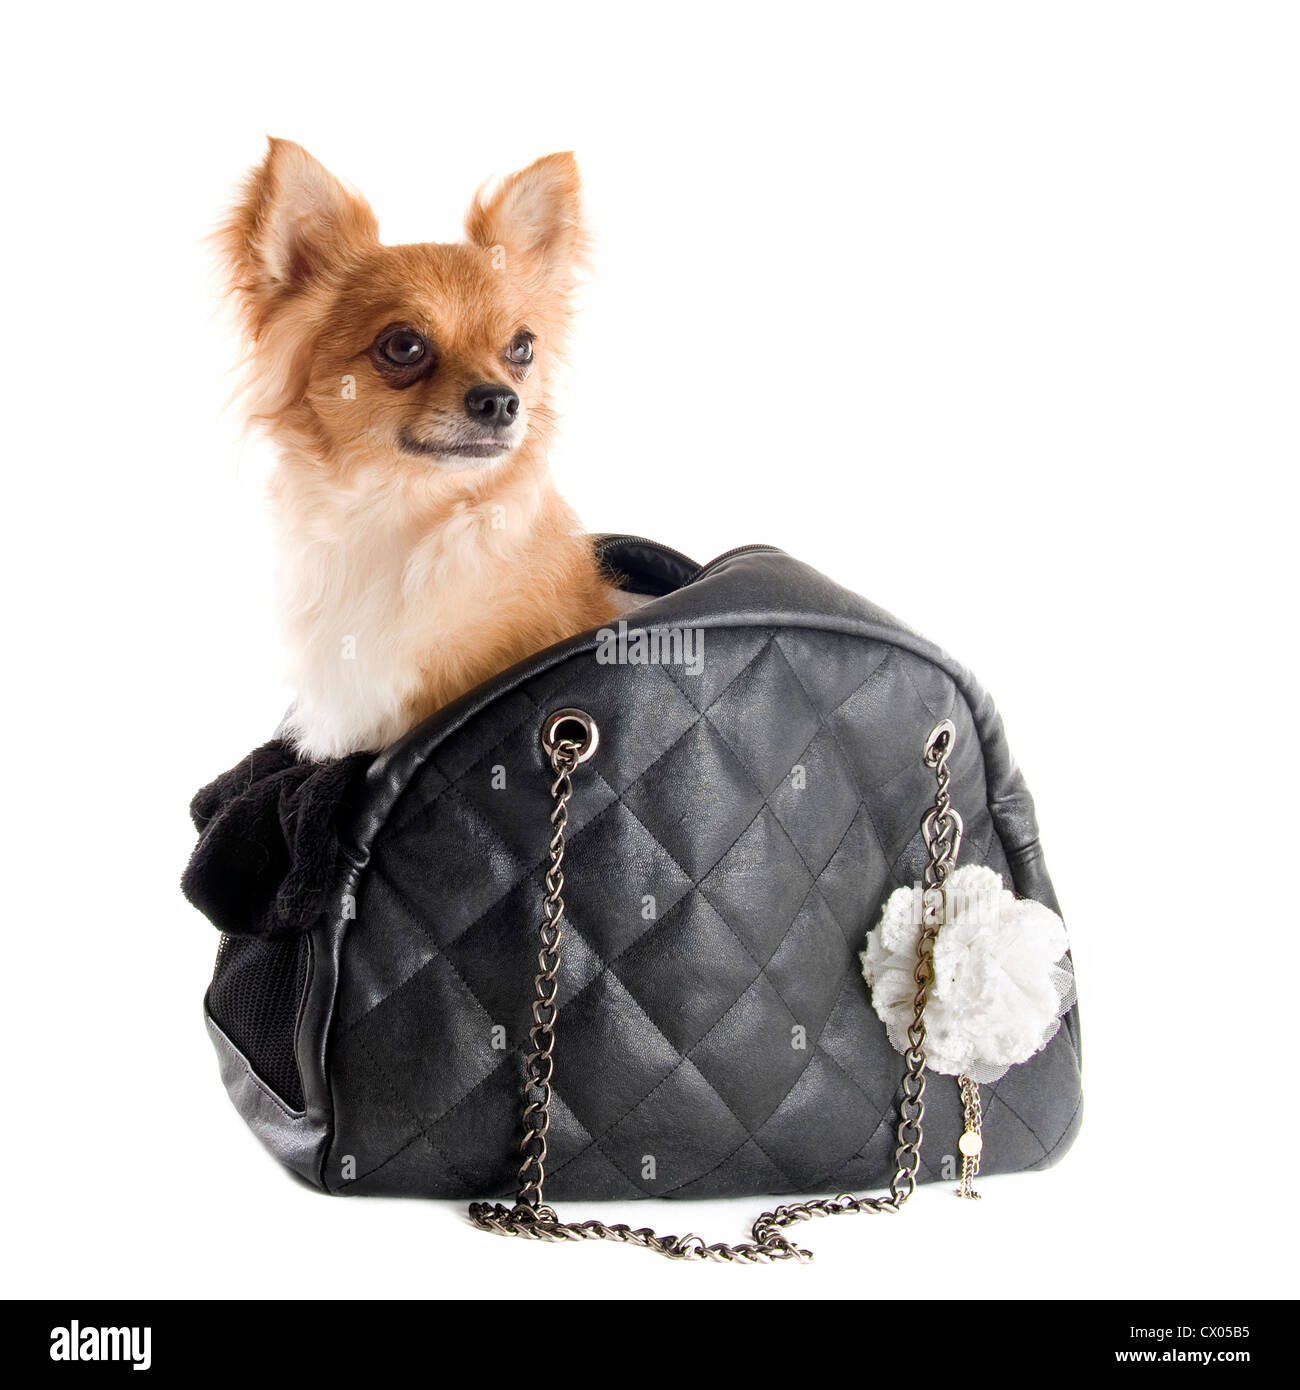 Chihuahua Bag High Resolution Stock Photography and Images - Alamy